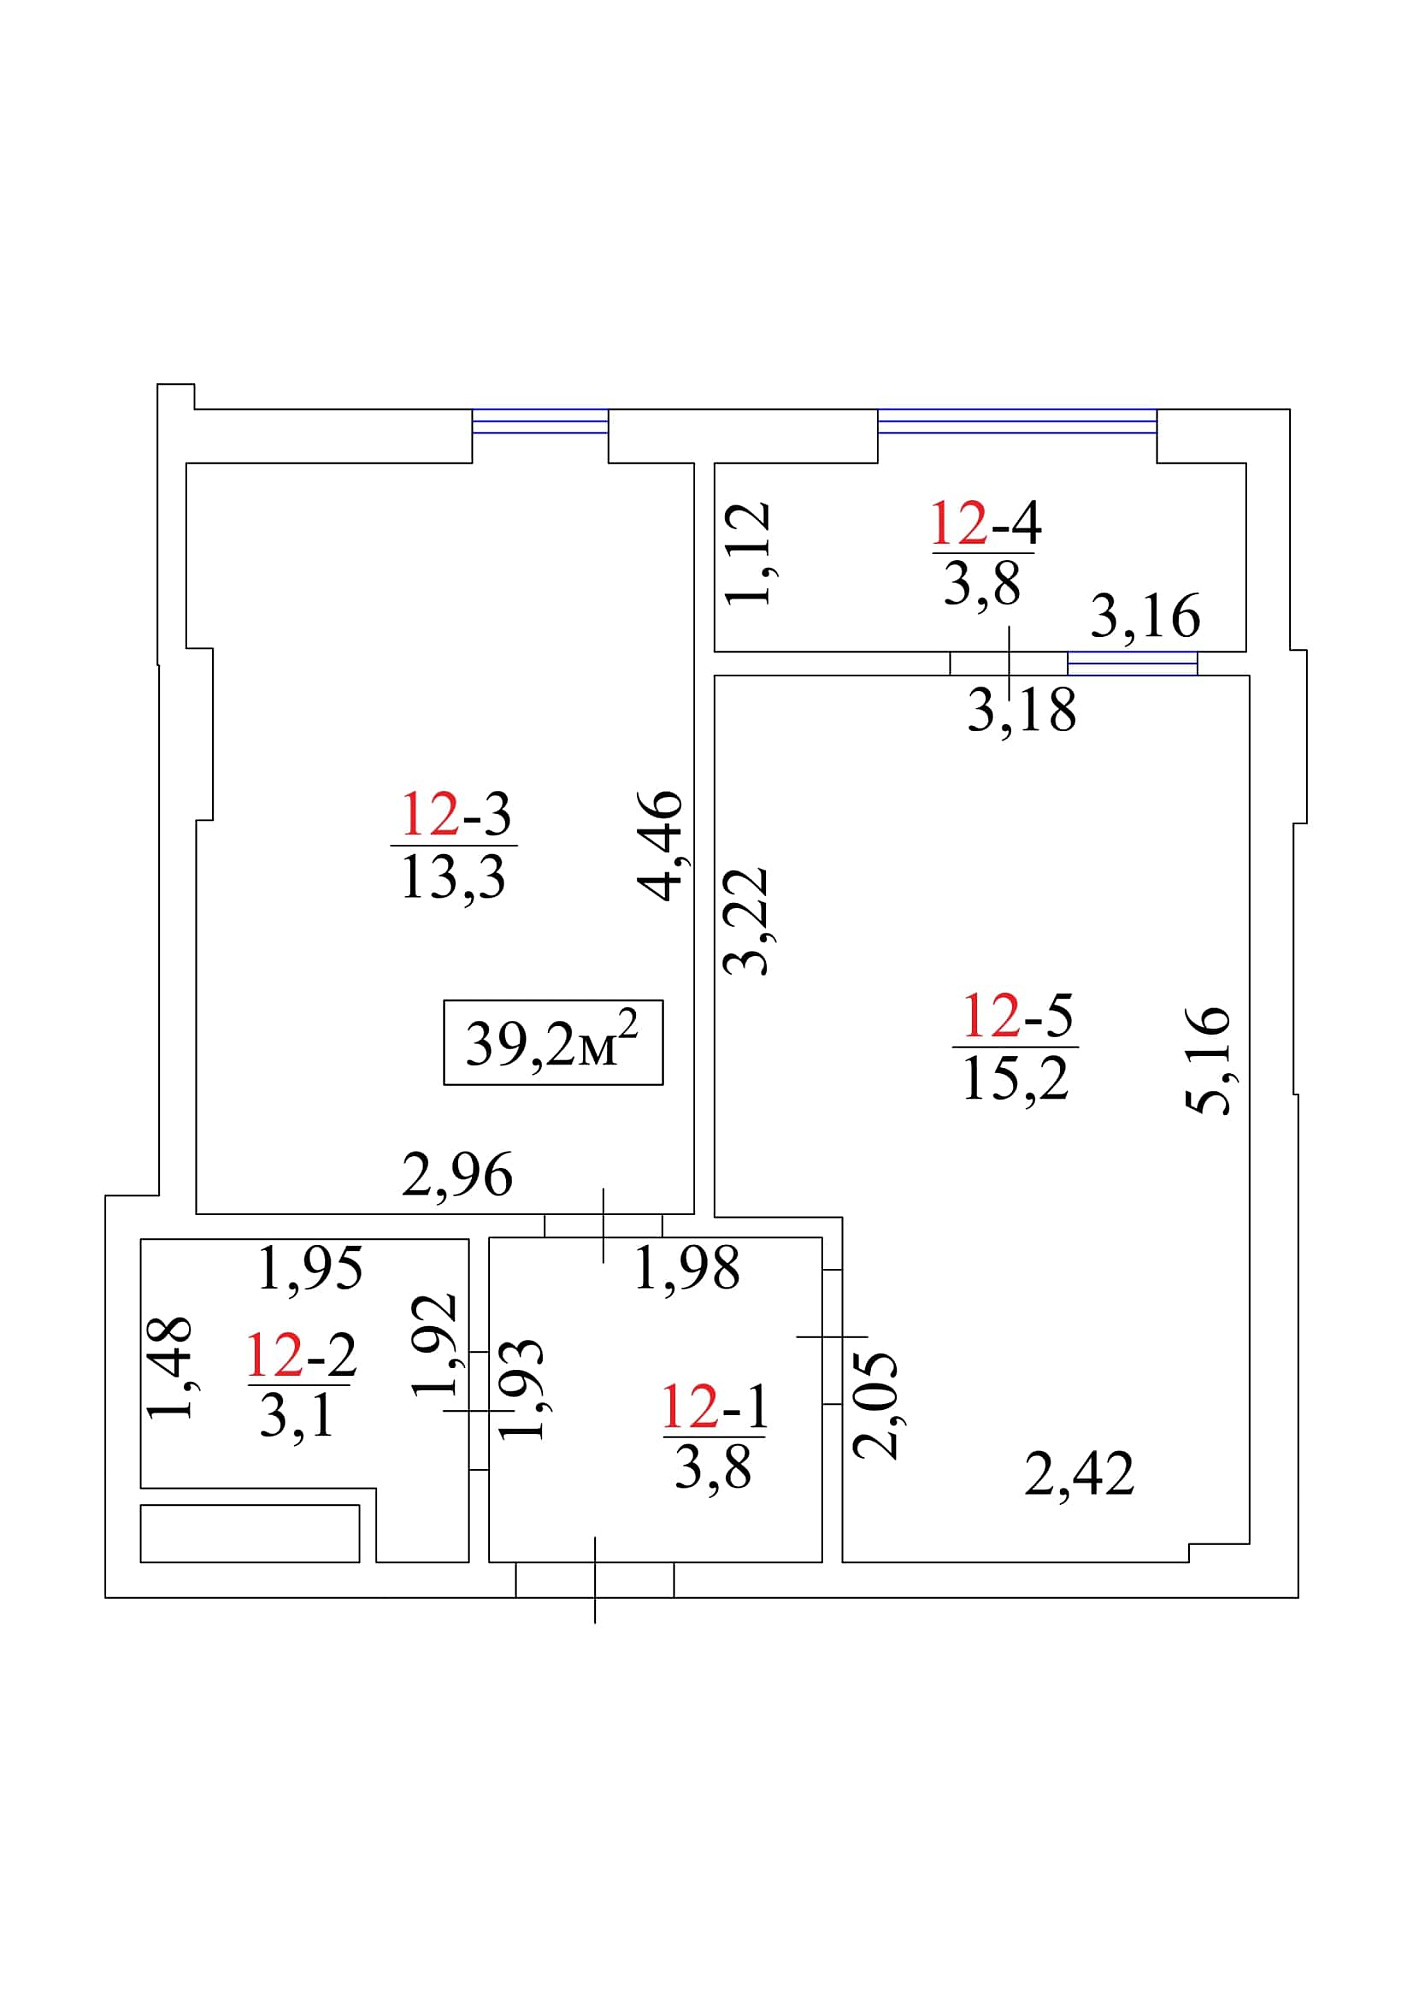 Planning 1-rm flats area 39.2m2, AB-01-02/00014.